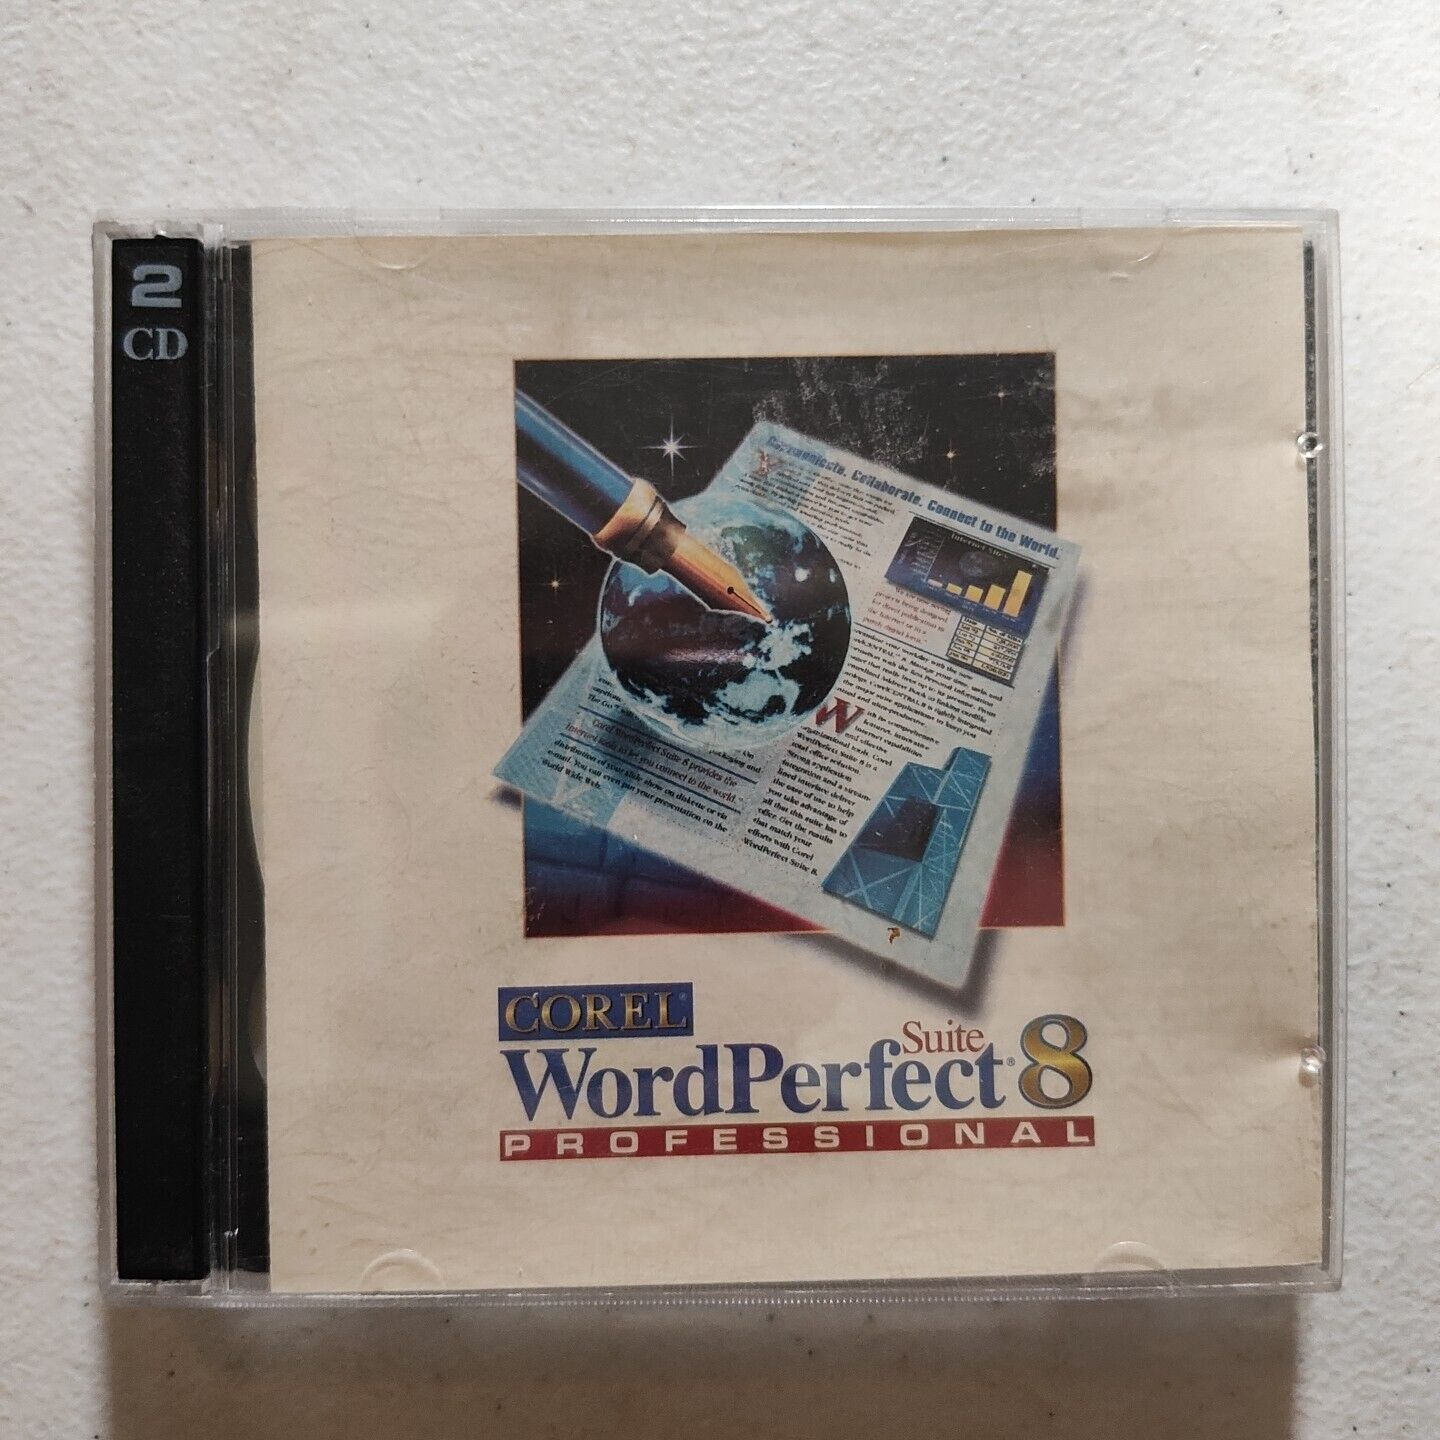 Corel WordPerfect Suite 8 Acad for Windows 95 and NT 4.0 Vintage Software CD-ROM